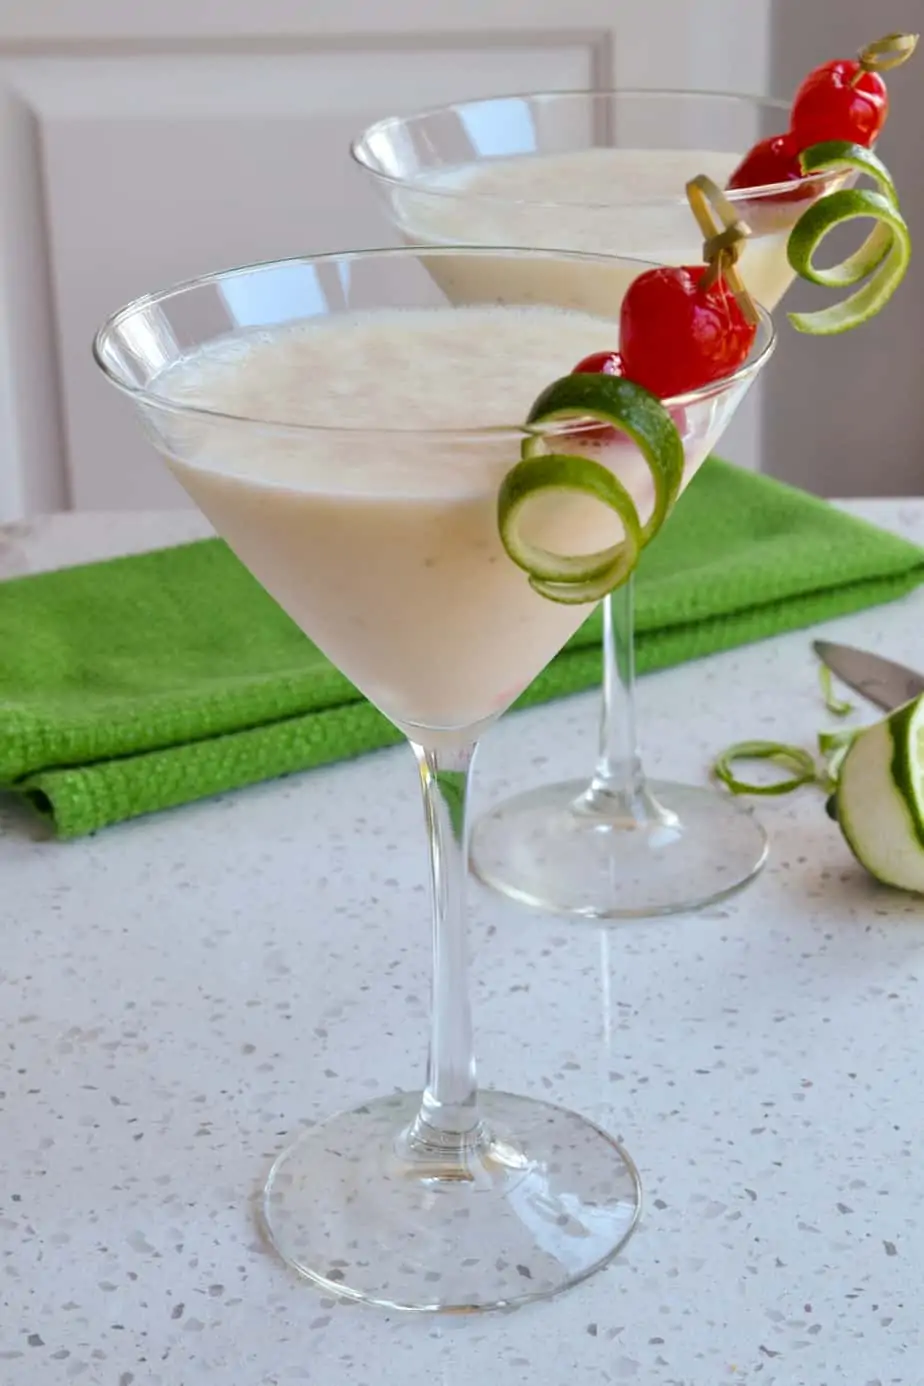 Rum, bananas, coconut milk, and ice are blended to make these cocktails. 